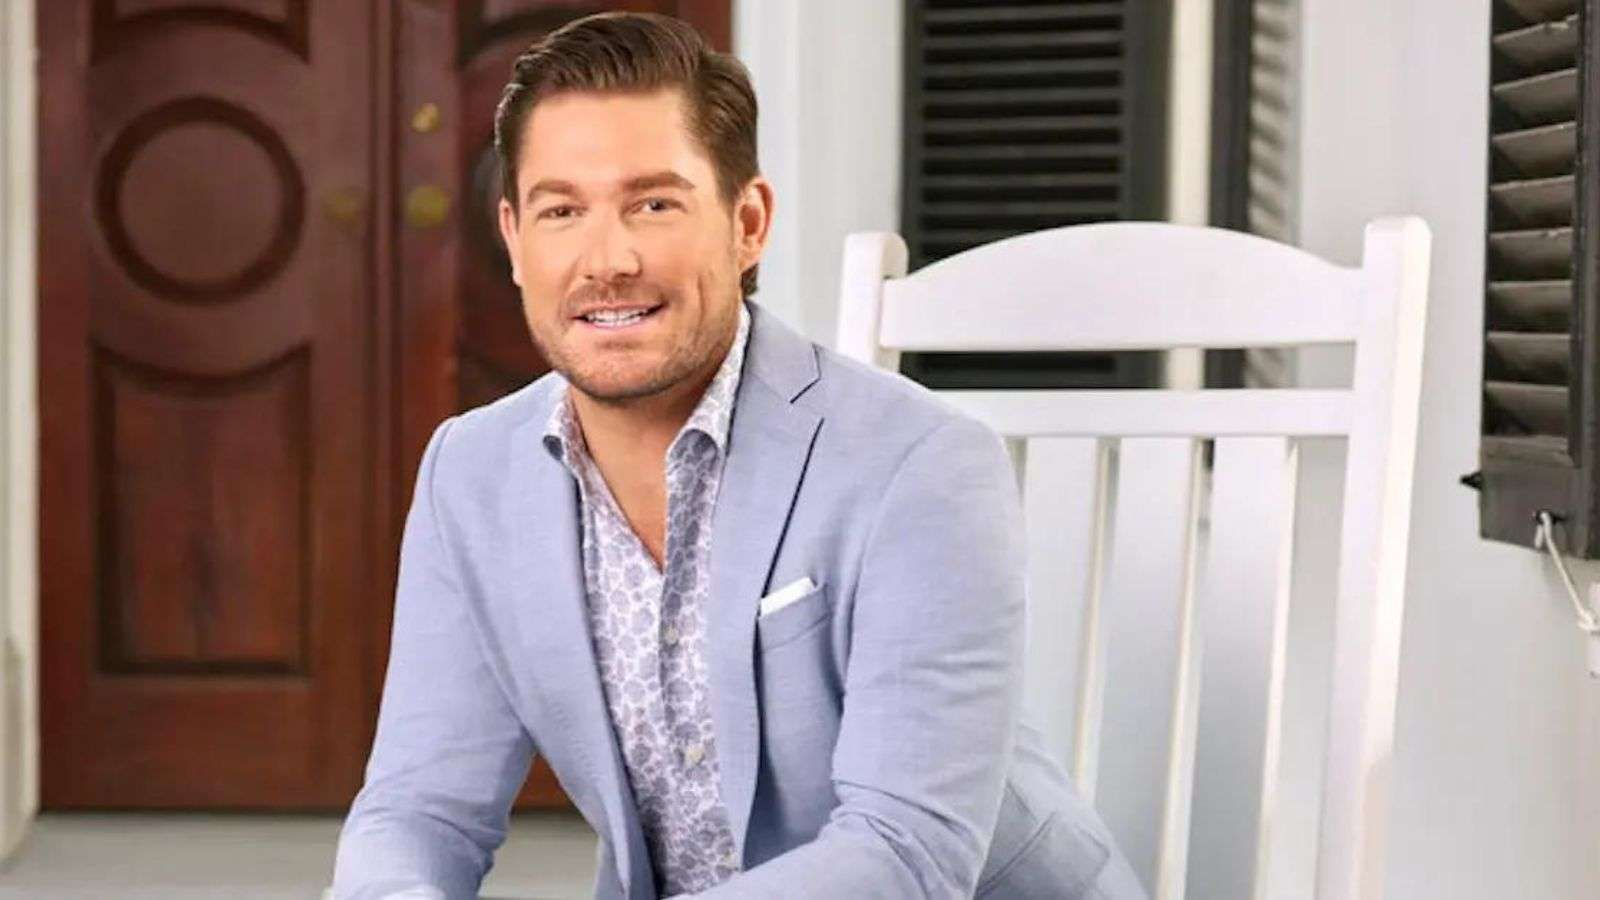 Craig from Southern Charm